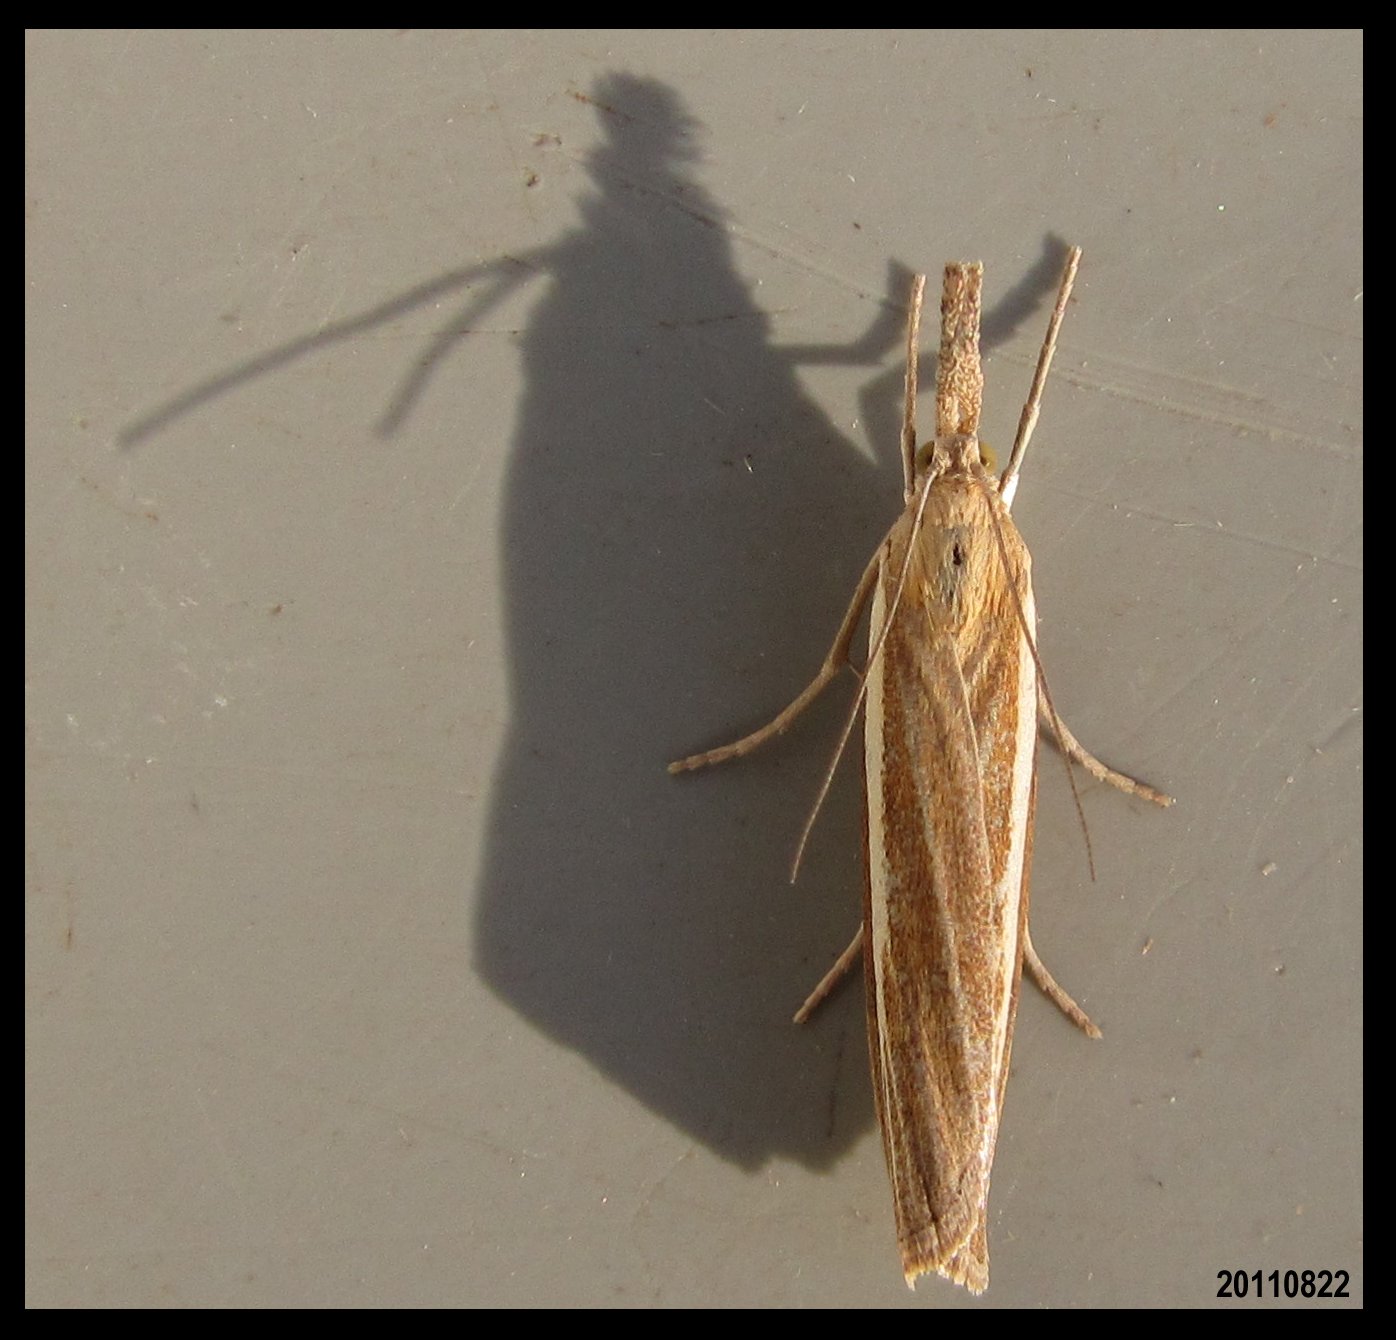 Top down view of a moth, casting a long shadow